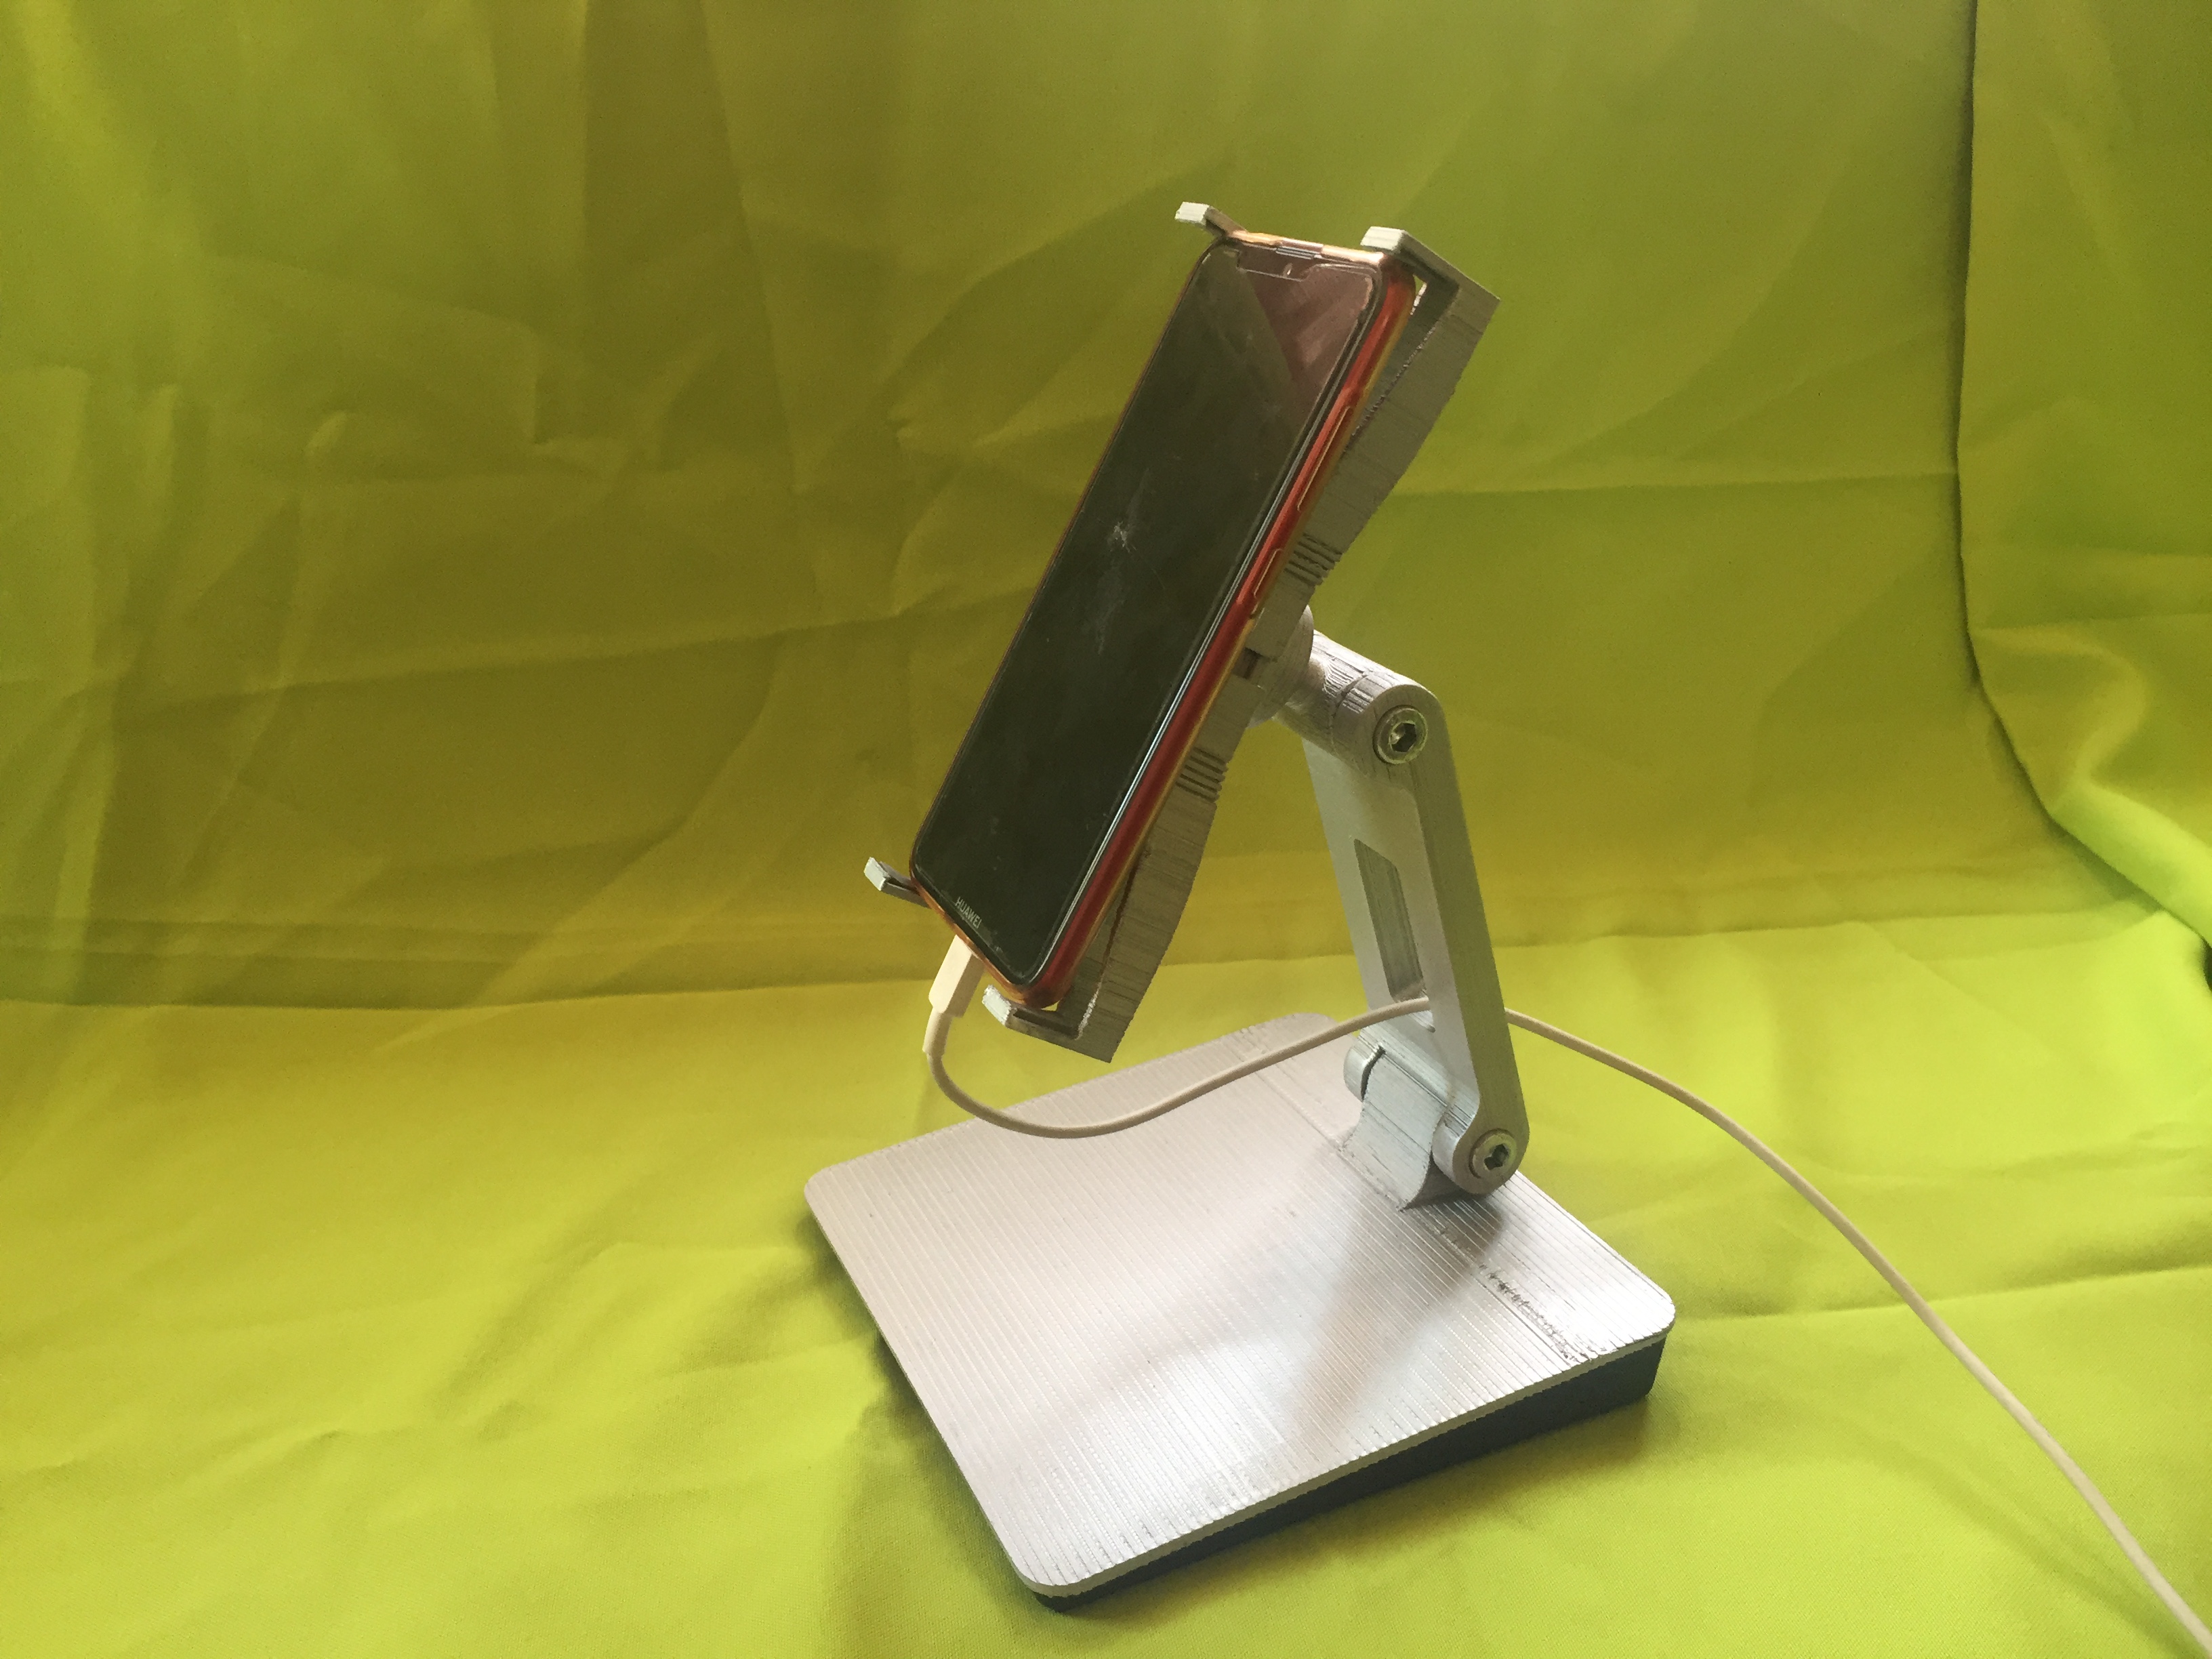 3d Printed Stand For Ipad And Tablets By Holmansolis Pinshape